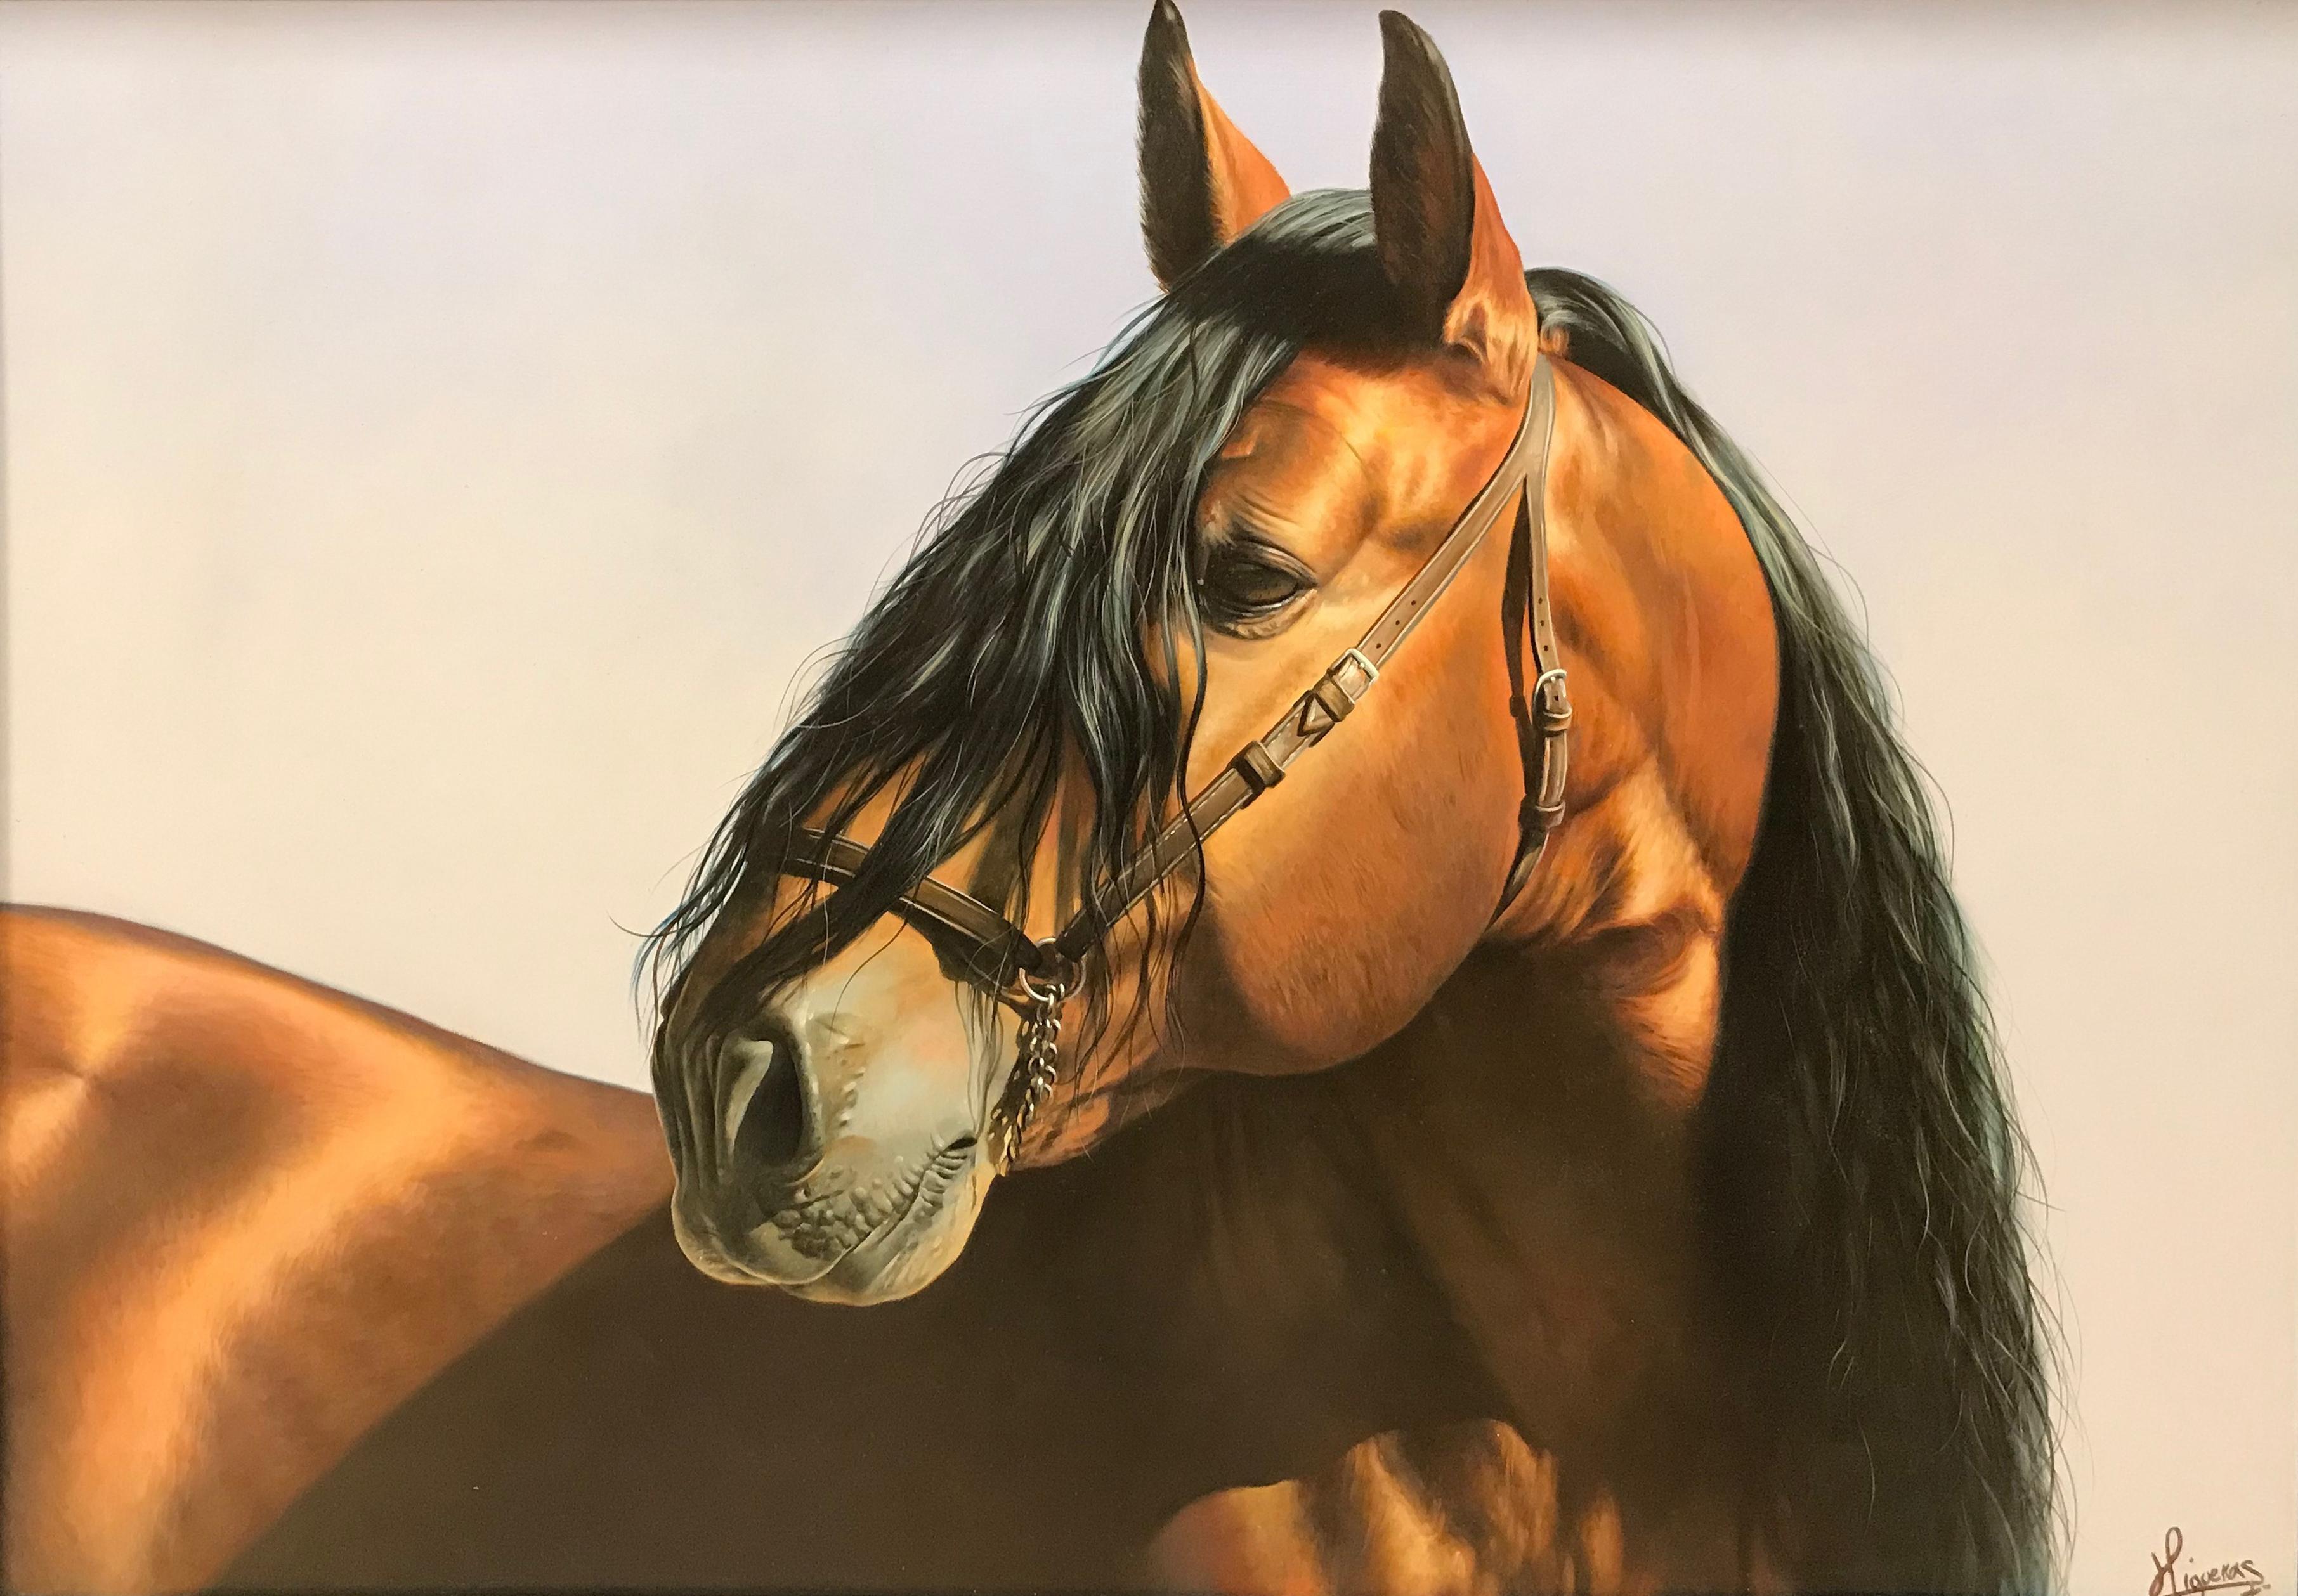 Manolo Higueras Figurative Painting - REALISM - HORSE